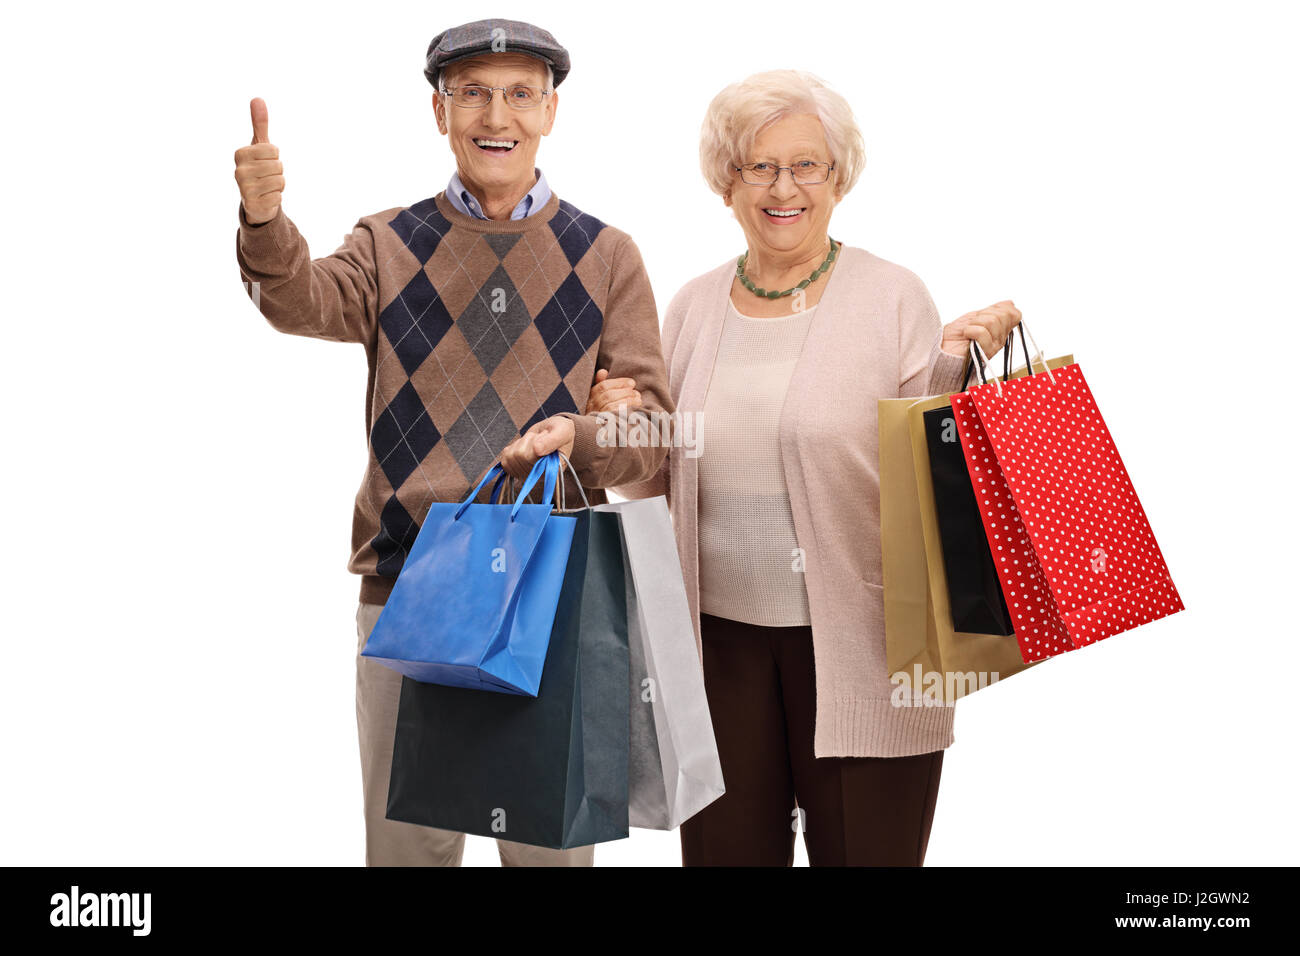 Elderly man and woman with shopping bags making a thumb up gesture isolated on white background Stock Photo